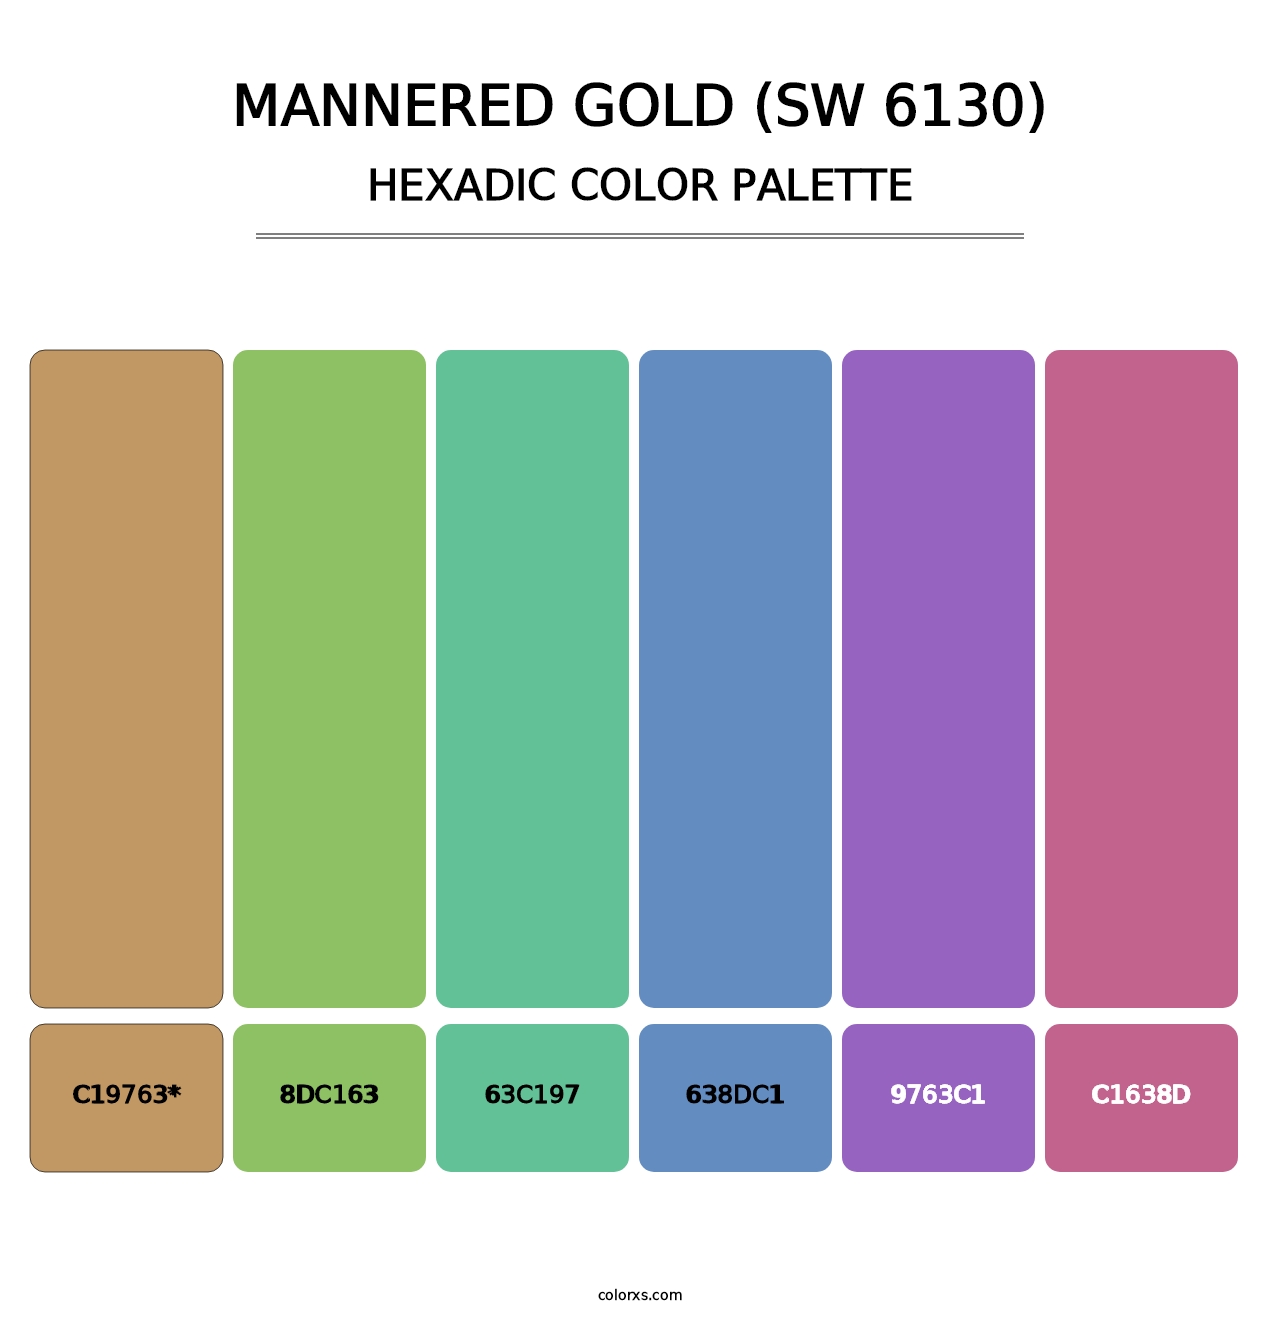 Mannered Gold (SW 6130) - Hexadic Color Palette